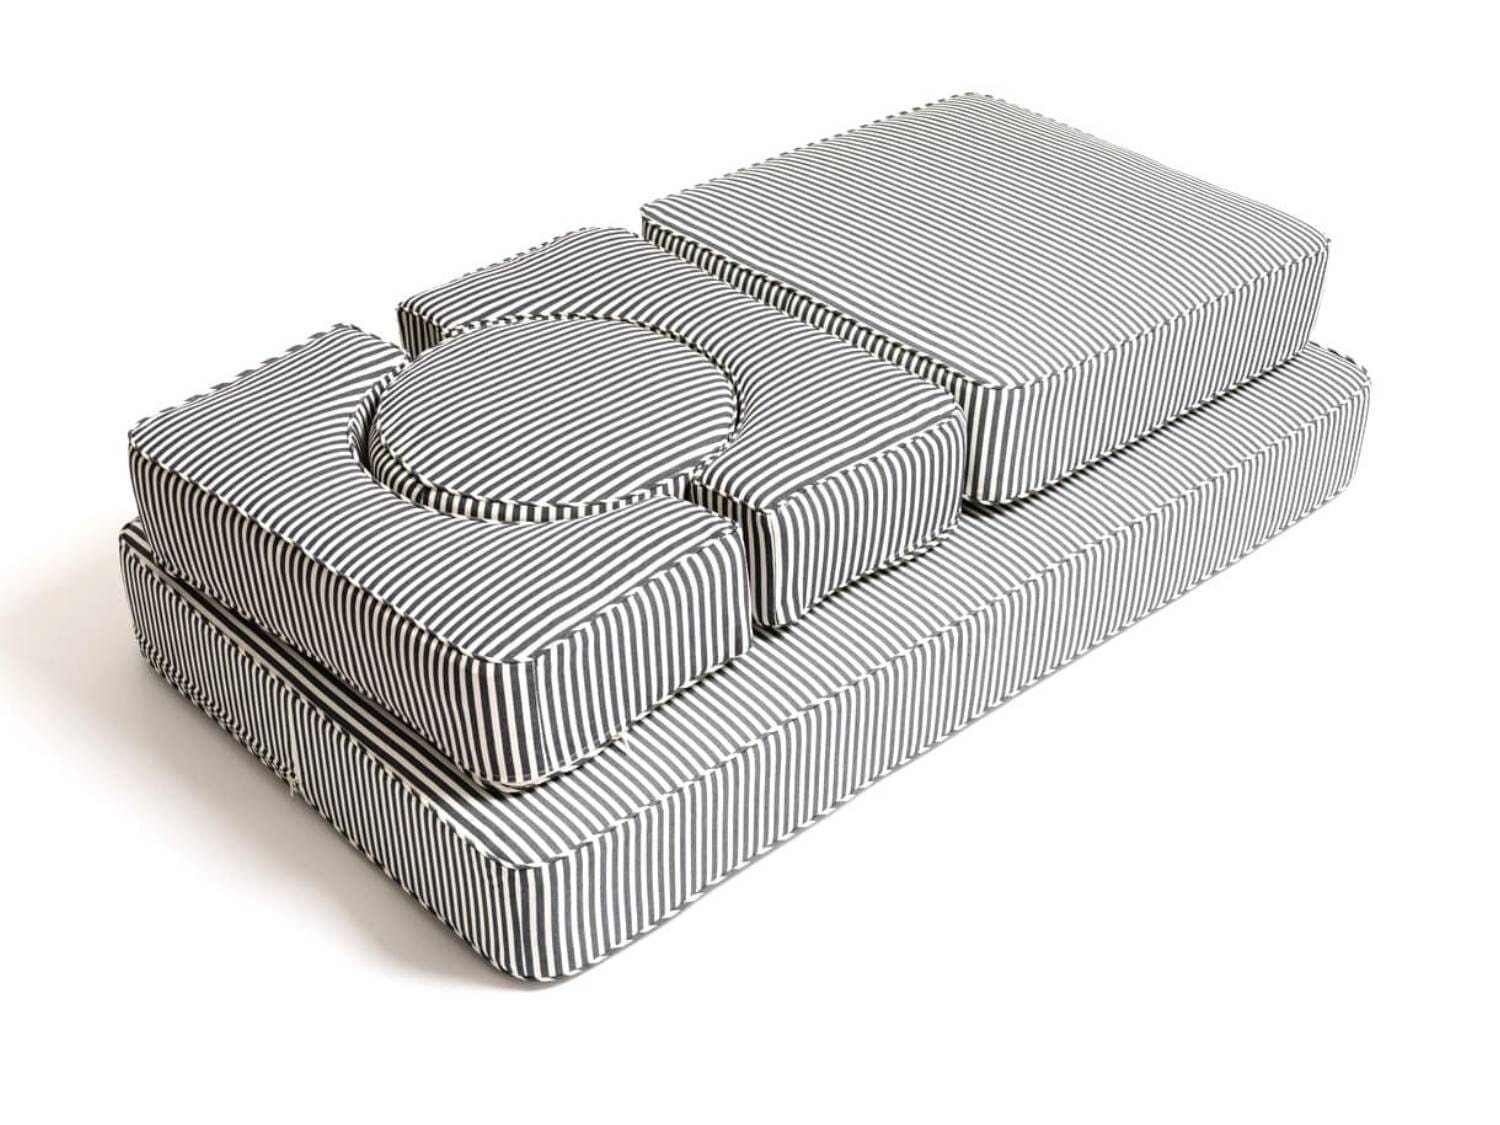 studio image of stacked up modular pillow stack\